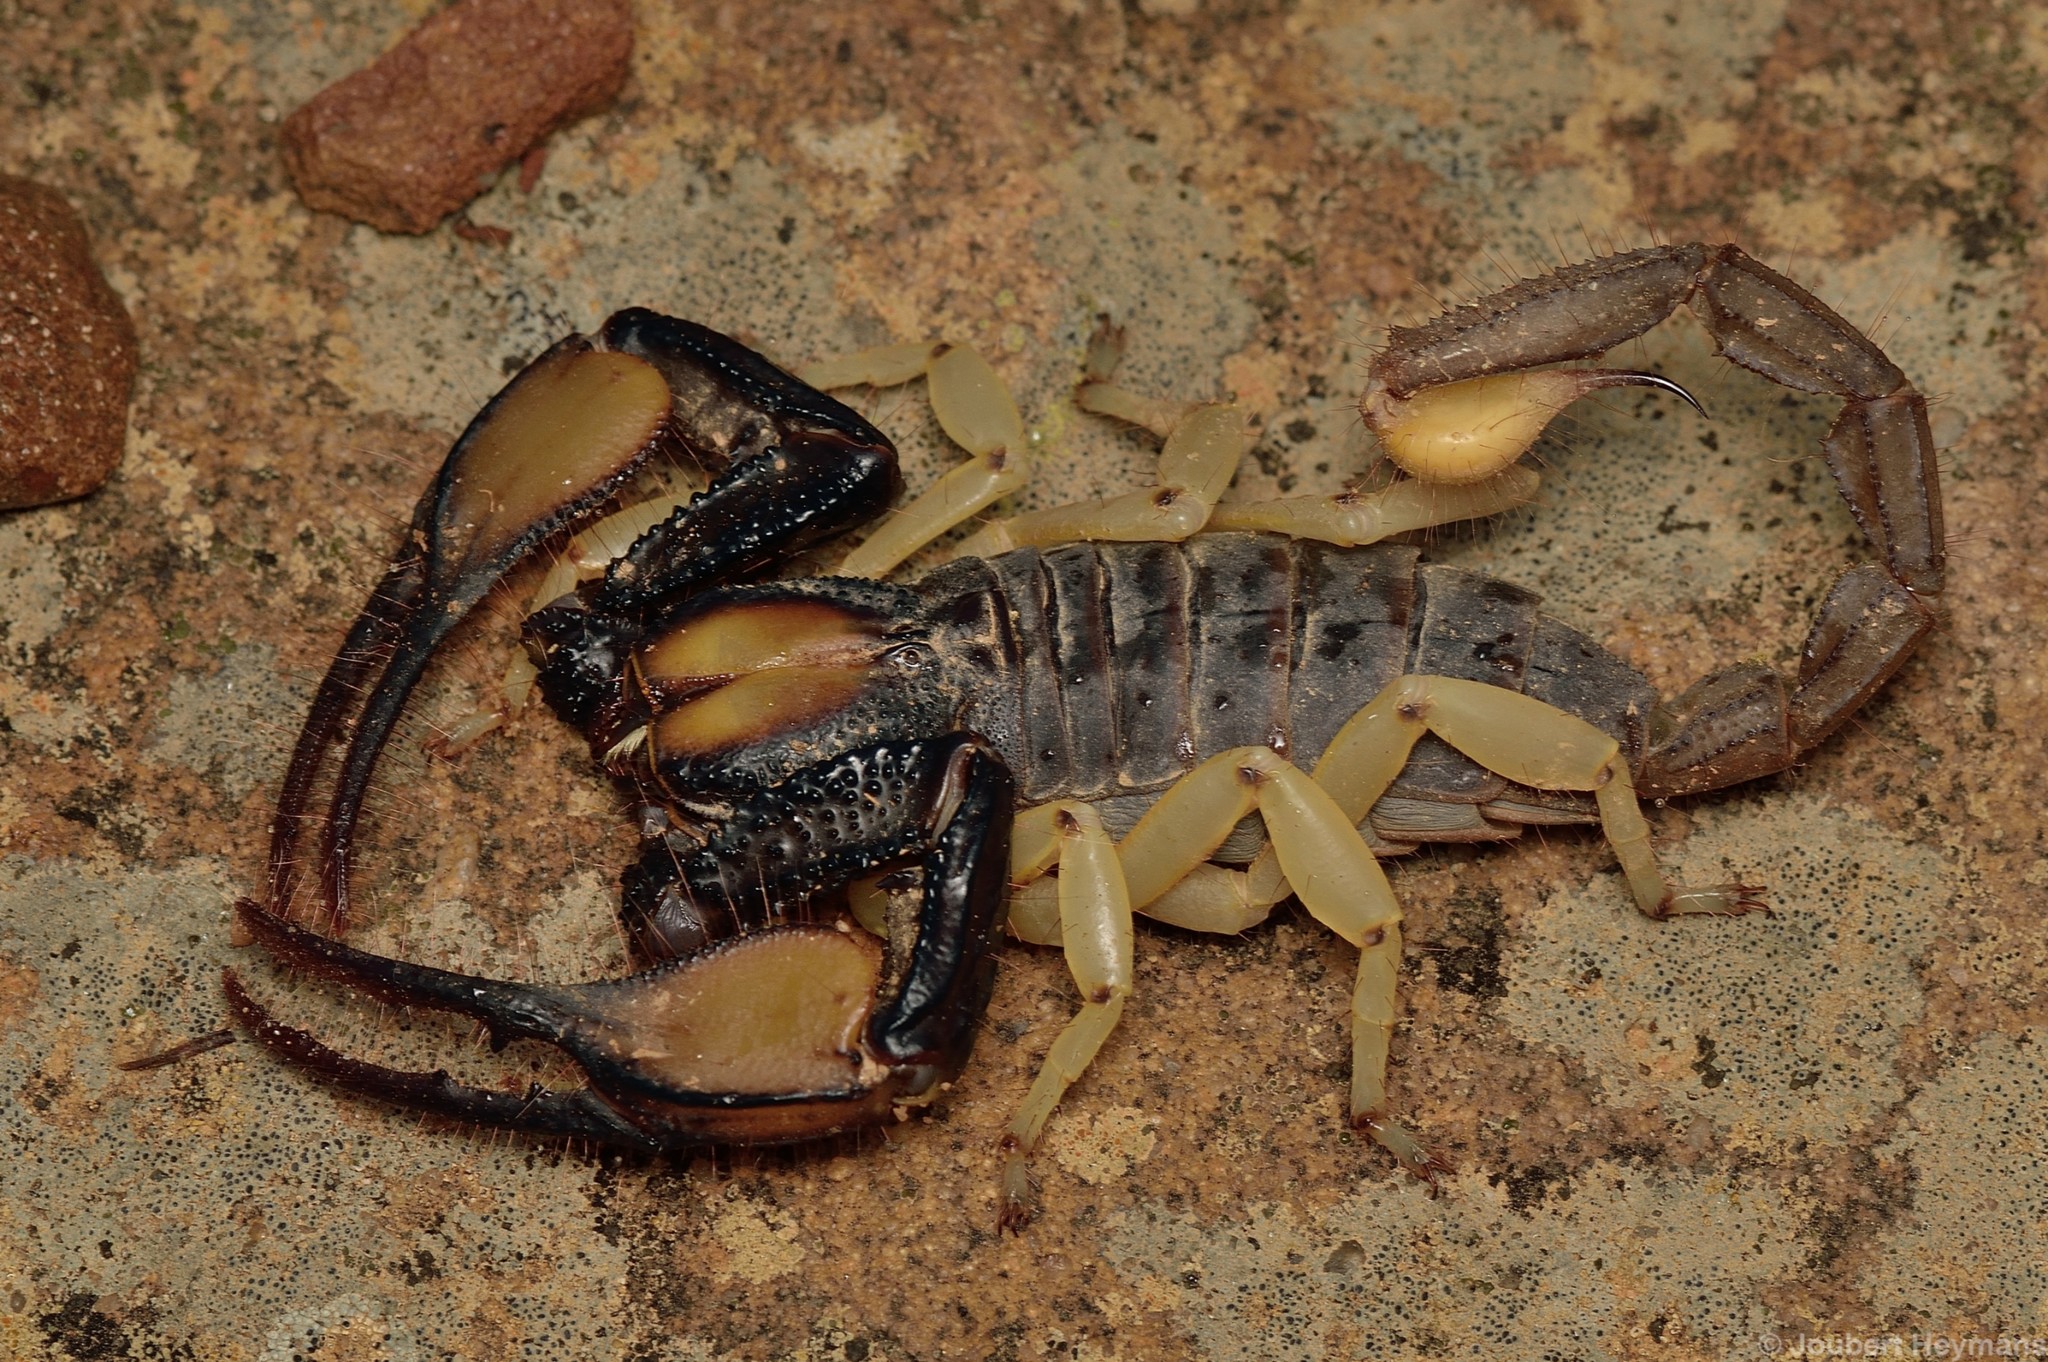 Southern African Burrowing Scorpions (Genus Opistophthalmus) · iNaturalist